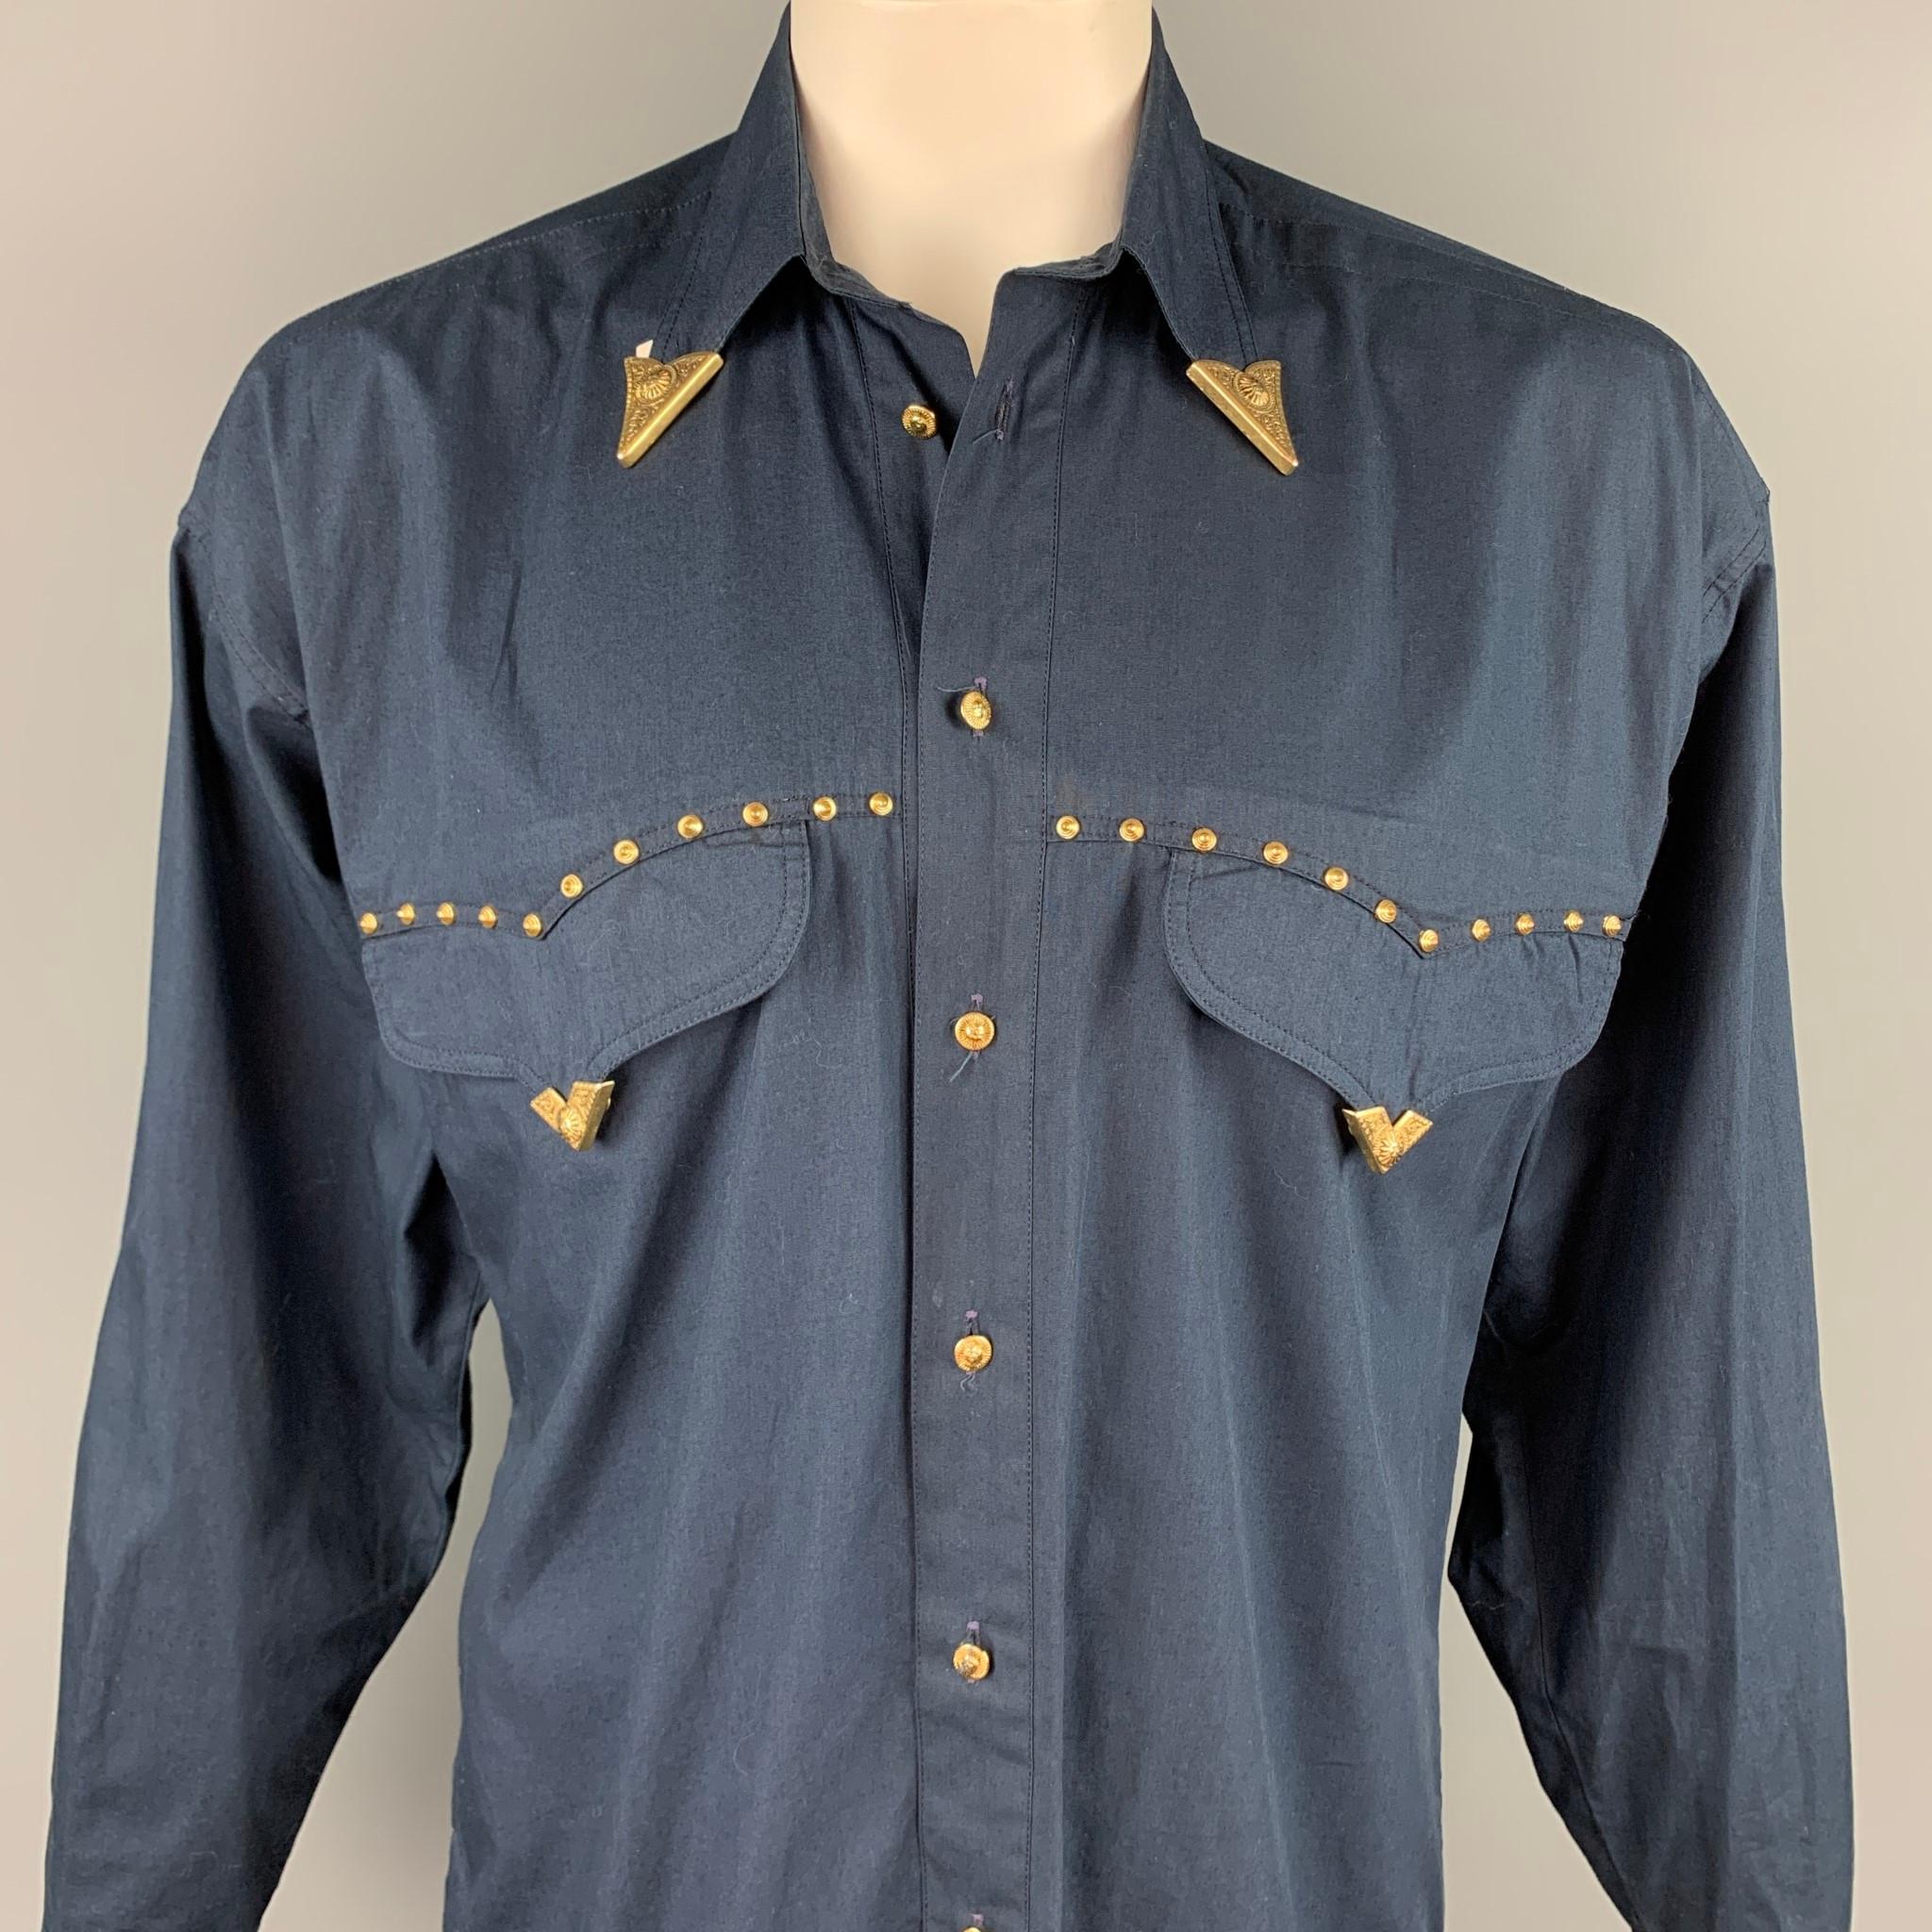 Vintage VERSACE JEANS COUTURE long sleeve shirt comes in a navy cotton with gold tone hardware details featuring a cowboy button up style, oversized, front pockets, and a pointed collar. Made in Italy.

Good Pre-Owned Condition.
Marked: